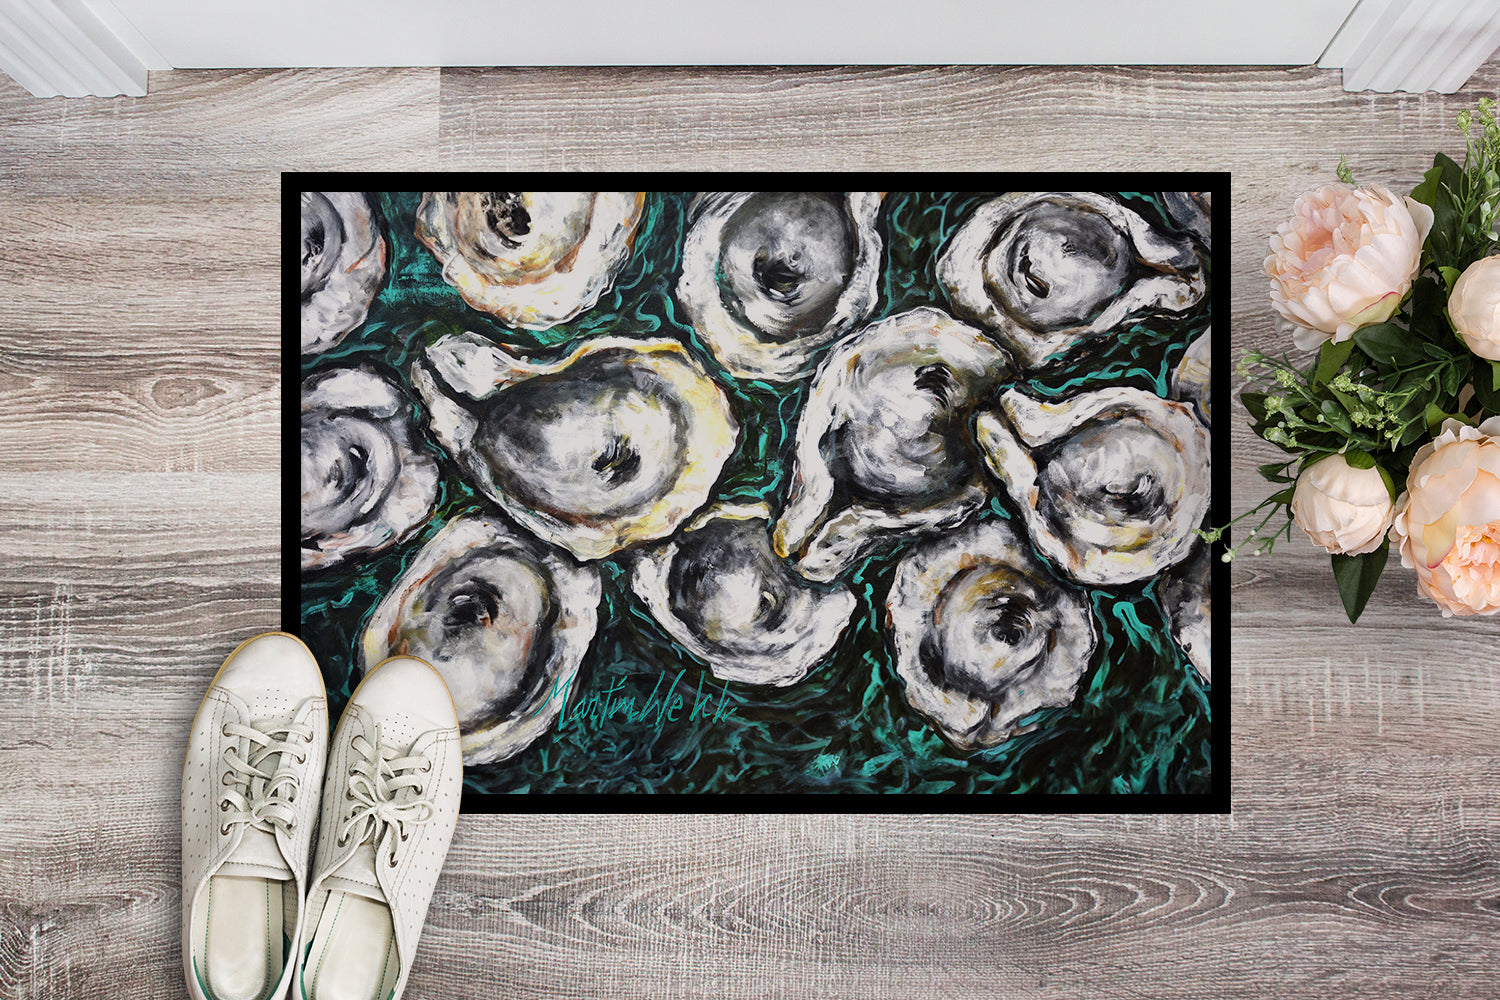 Buy this Oyster Lily Doormat